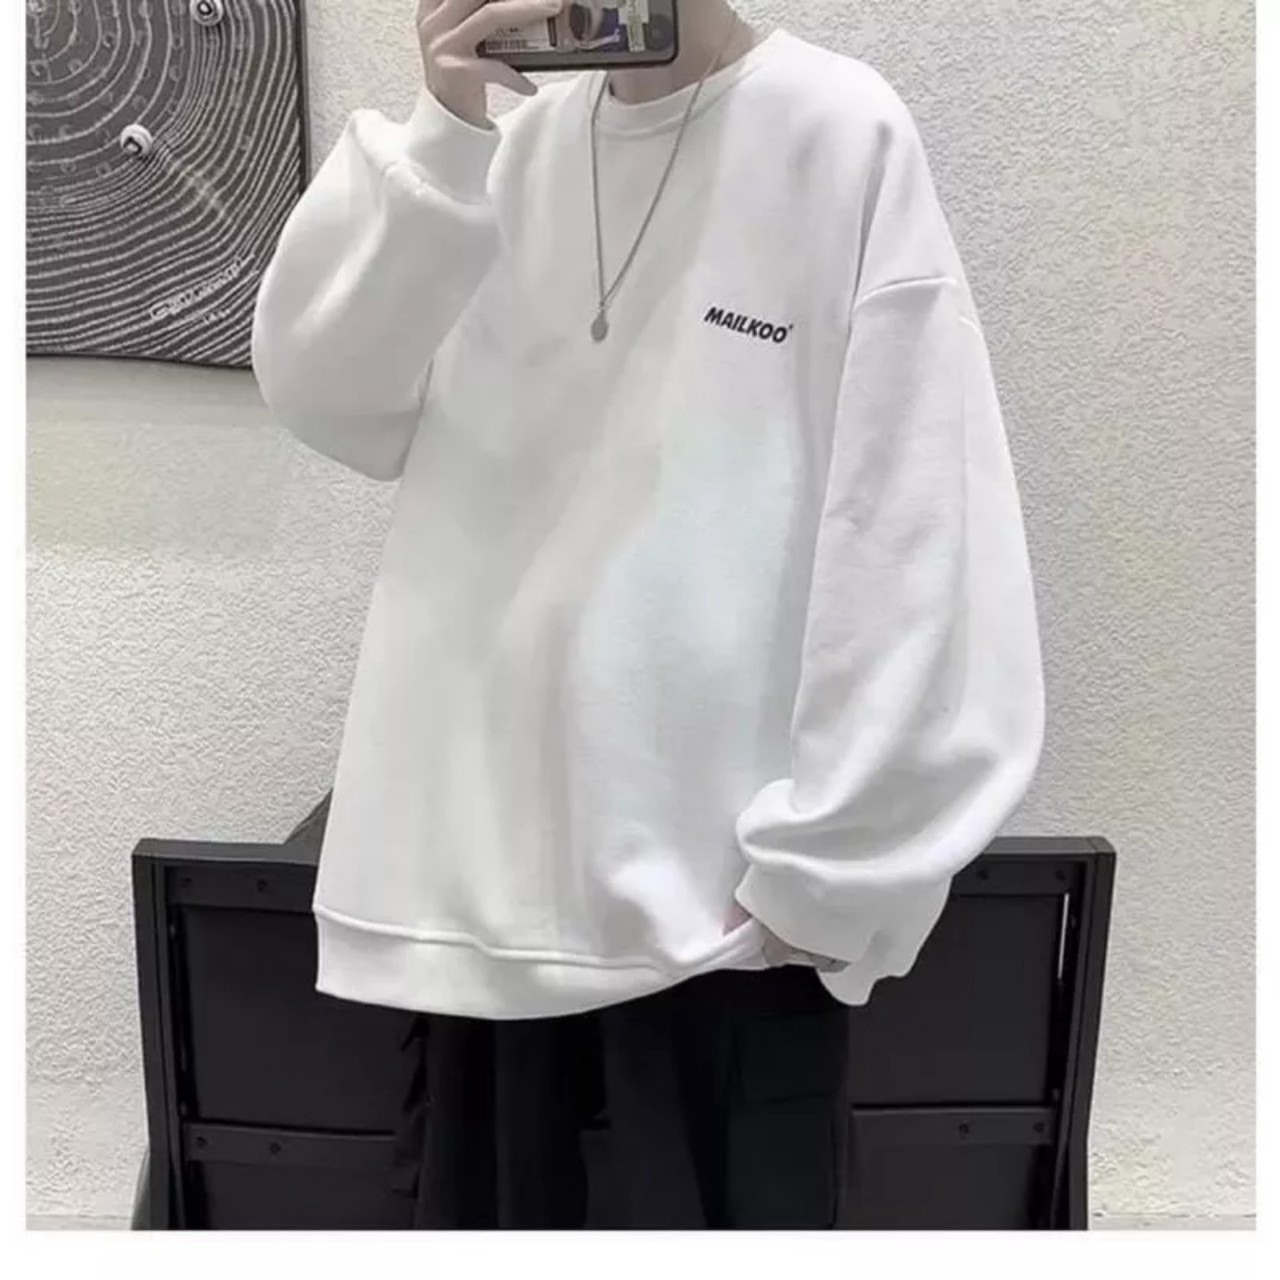 mochanstore.com AO SWEATER UNISEX FORM RONG NAM NU CHAT NI COTTON 1